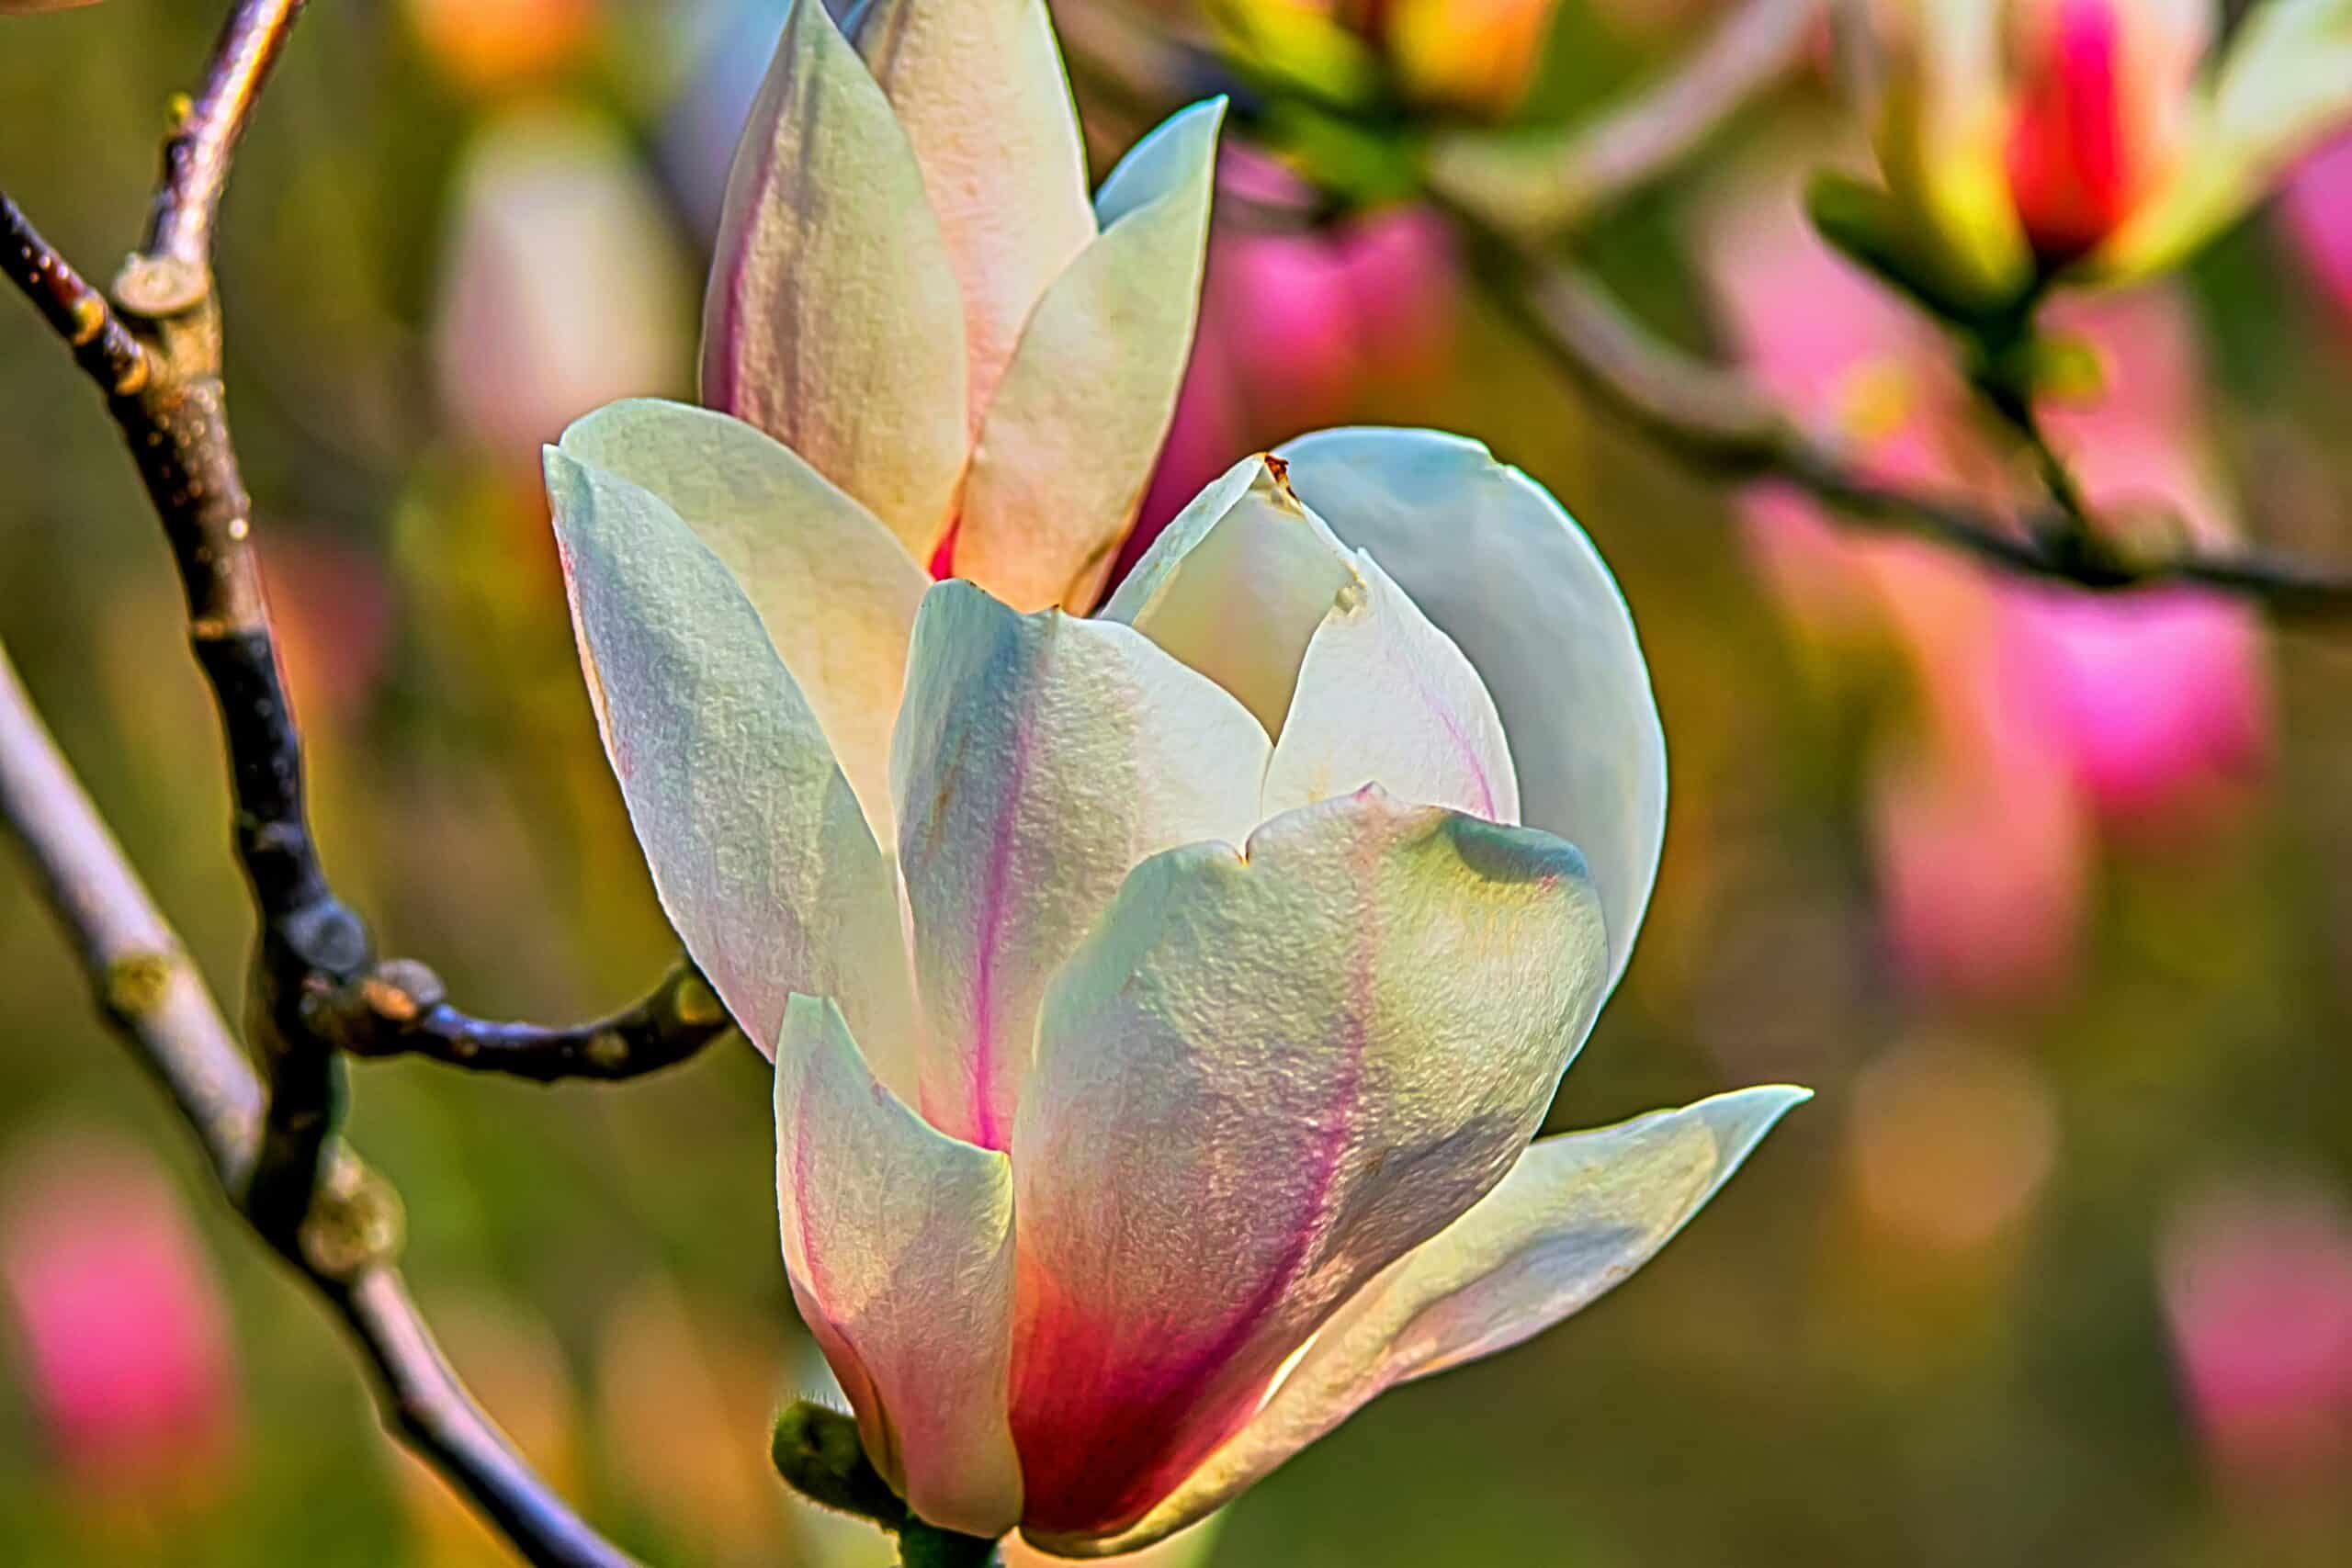 discover the beauty of magnolia trees with their stunning blooms and impressive stature. learn about different varieties, planting tips, and care techniques for these iconic flowering trees.